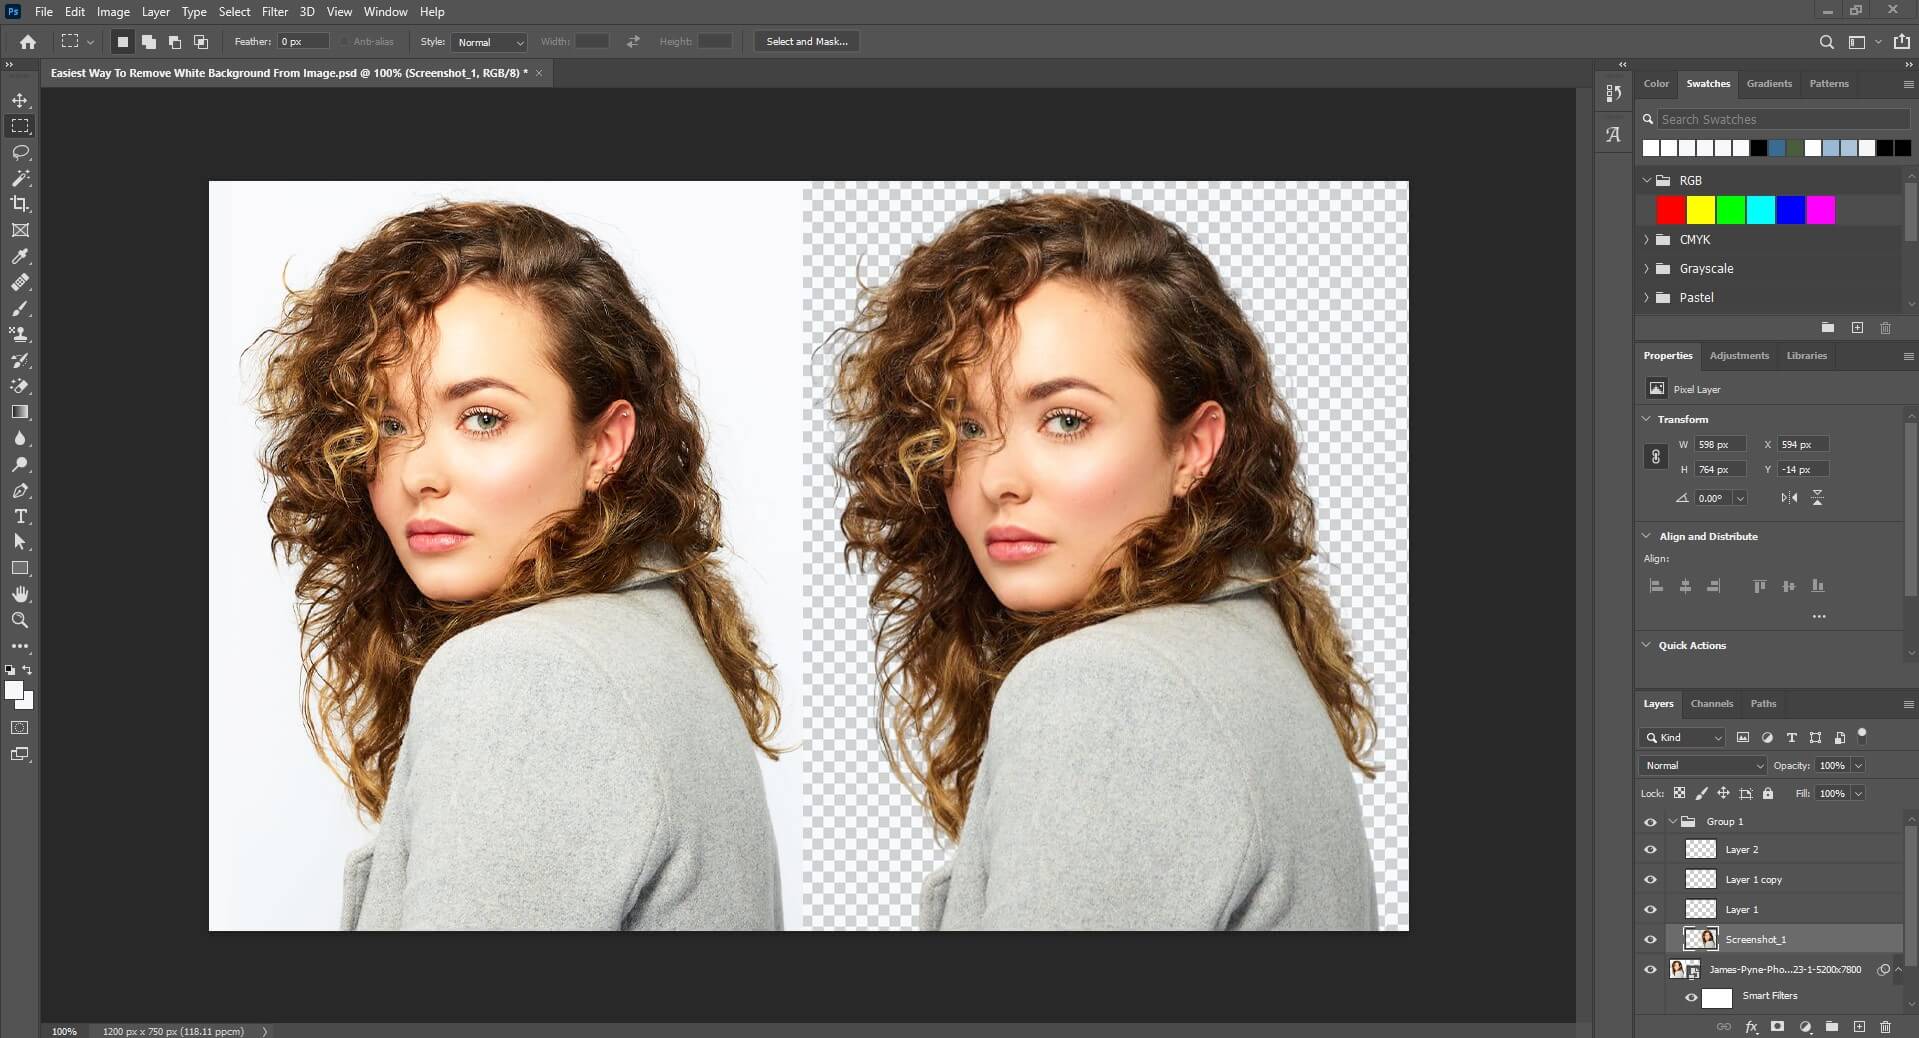 Remove White Background from Image by Photoshop